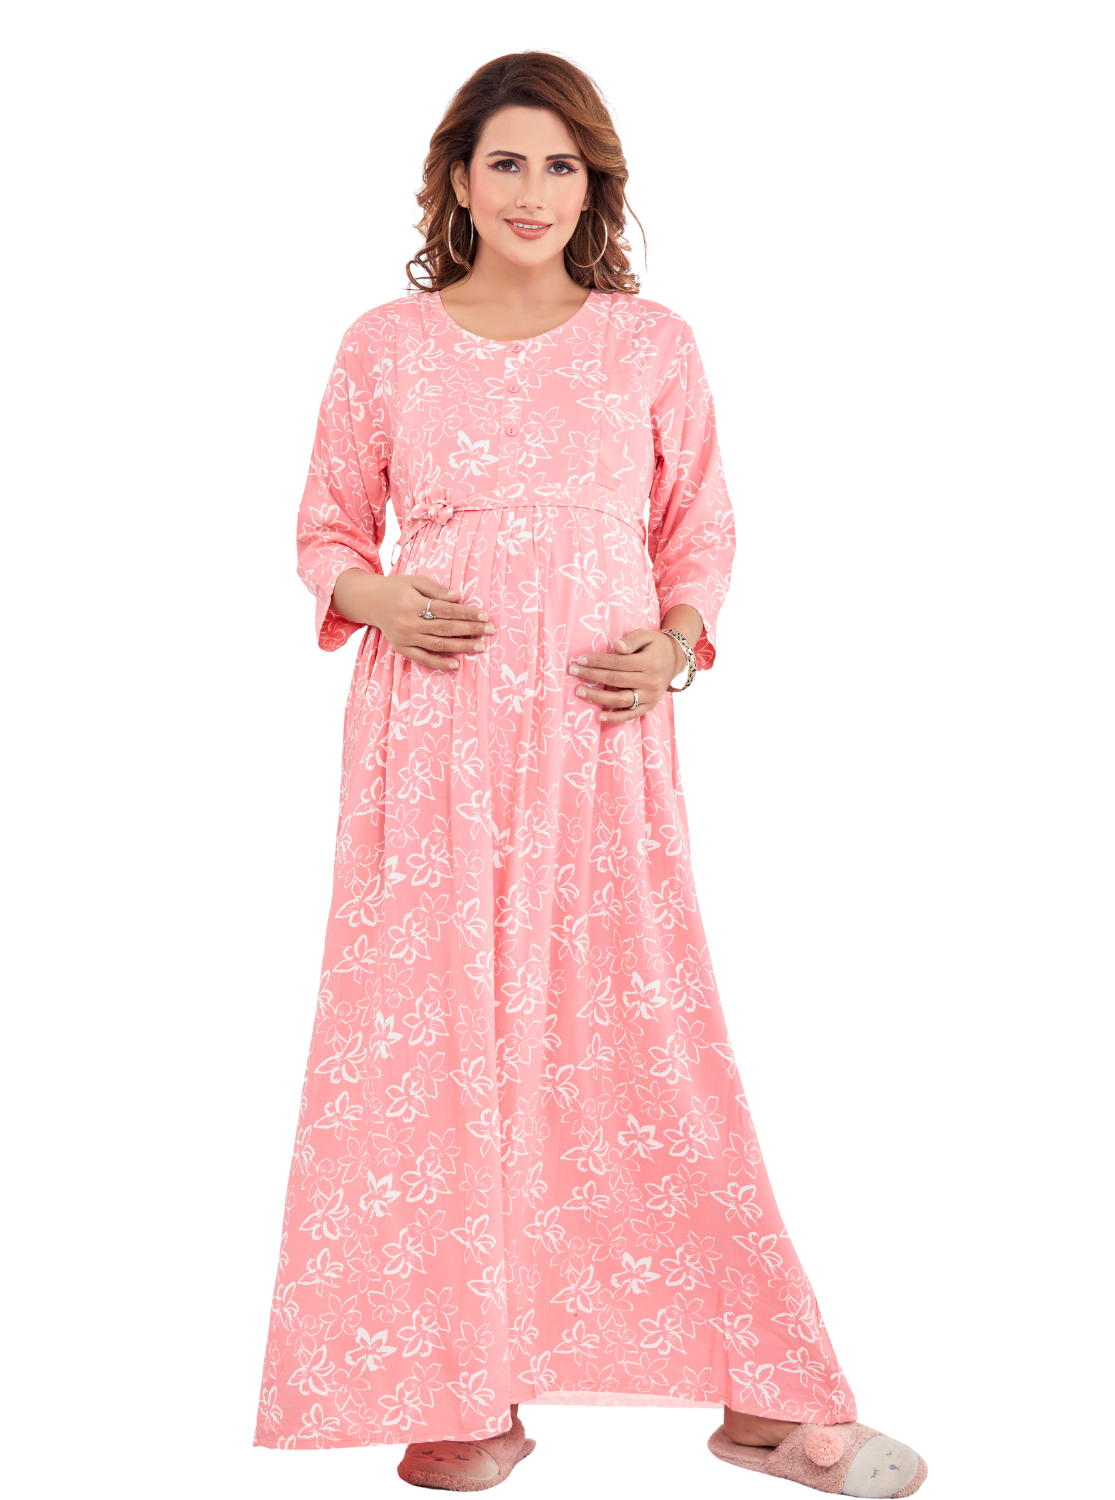 ONLY MINE New Arrival Premium 4-IN-ONE Mom's Wear - Soft & Smooth Rayon | Maternity | Feeding | Long Frock | Casual Wear for Pregnancy Women's